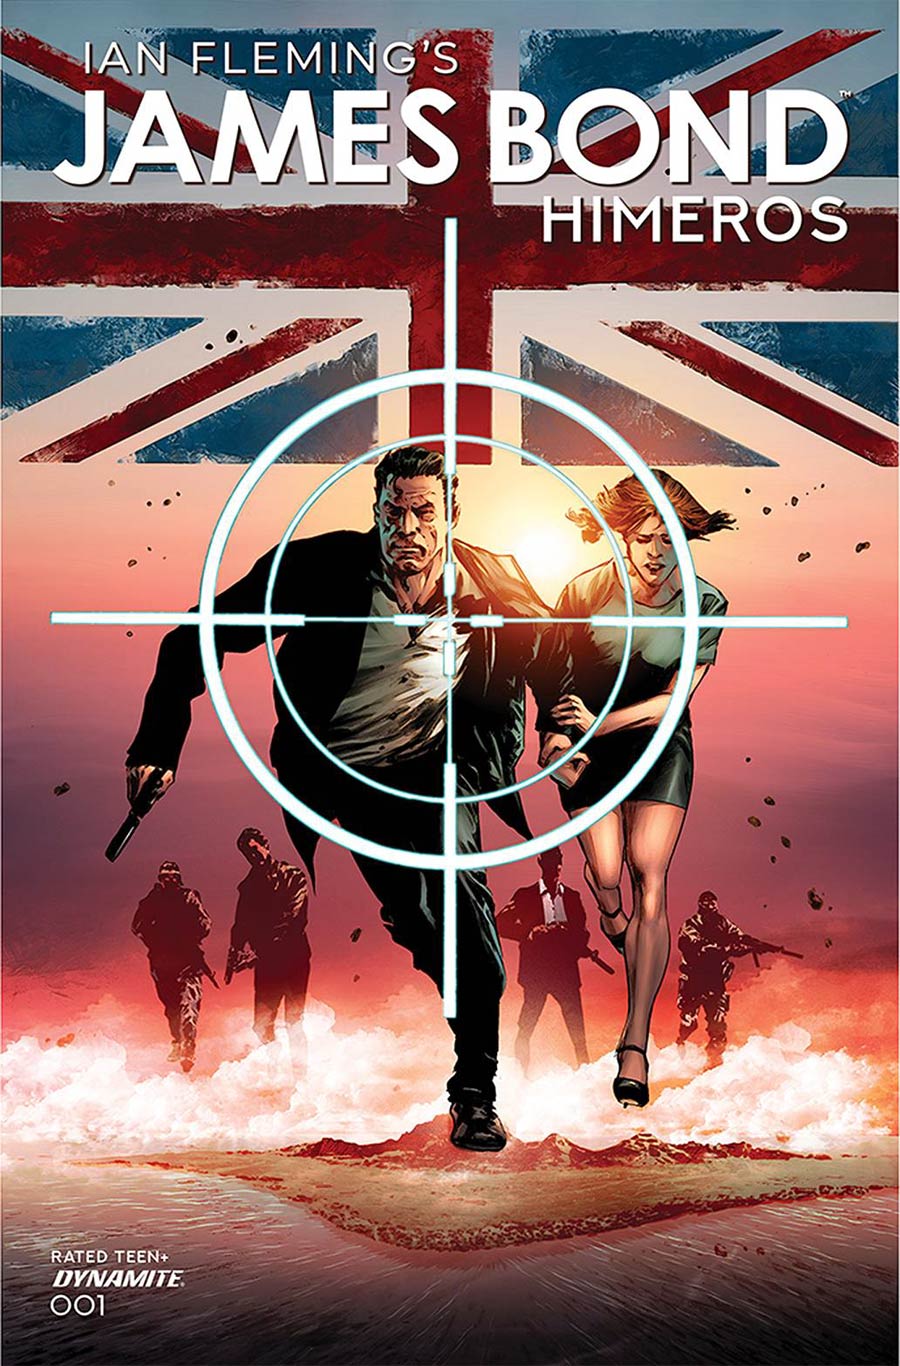 James Bond Himeros #1 Cover B Variant Butch Guice Cover